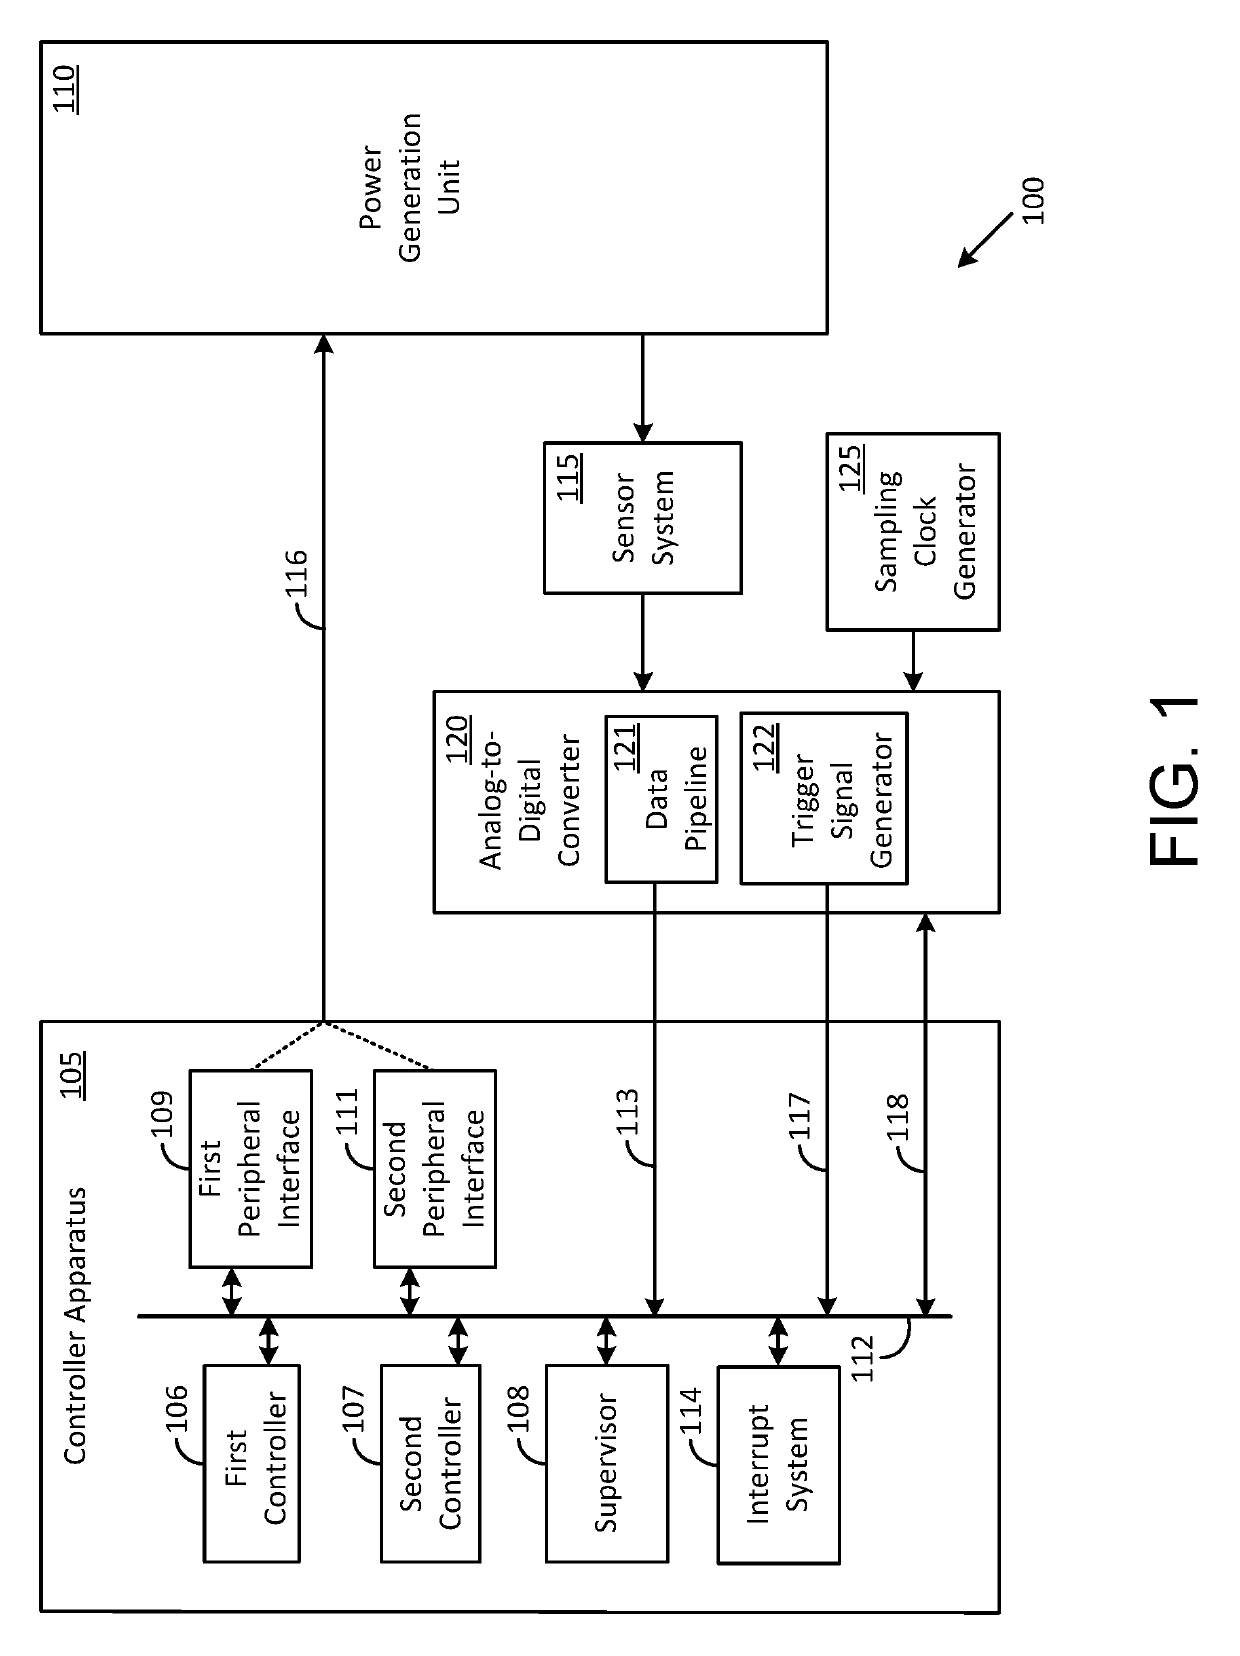 Systems and methods for controlling a power generation unit